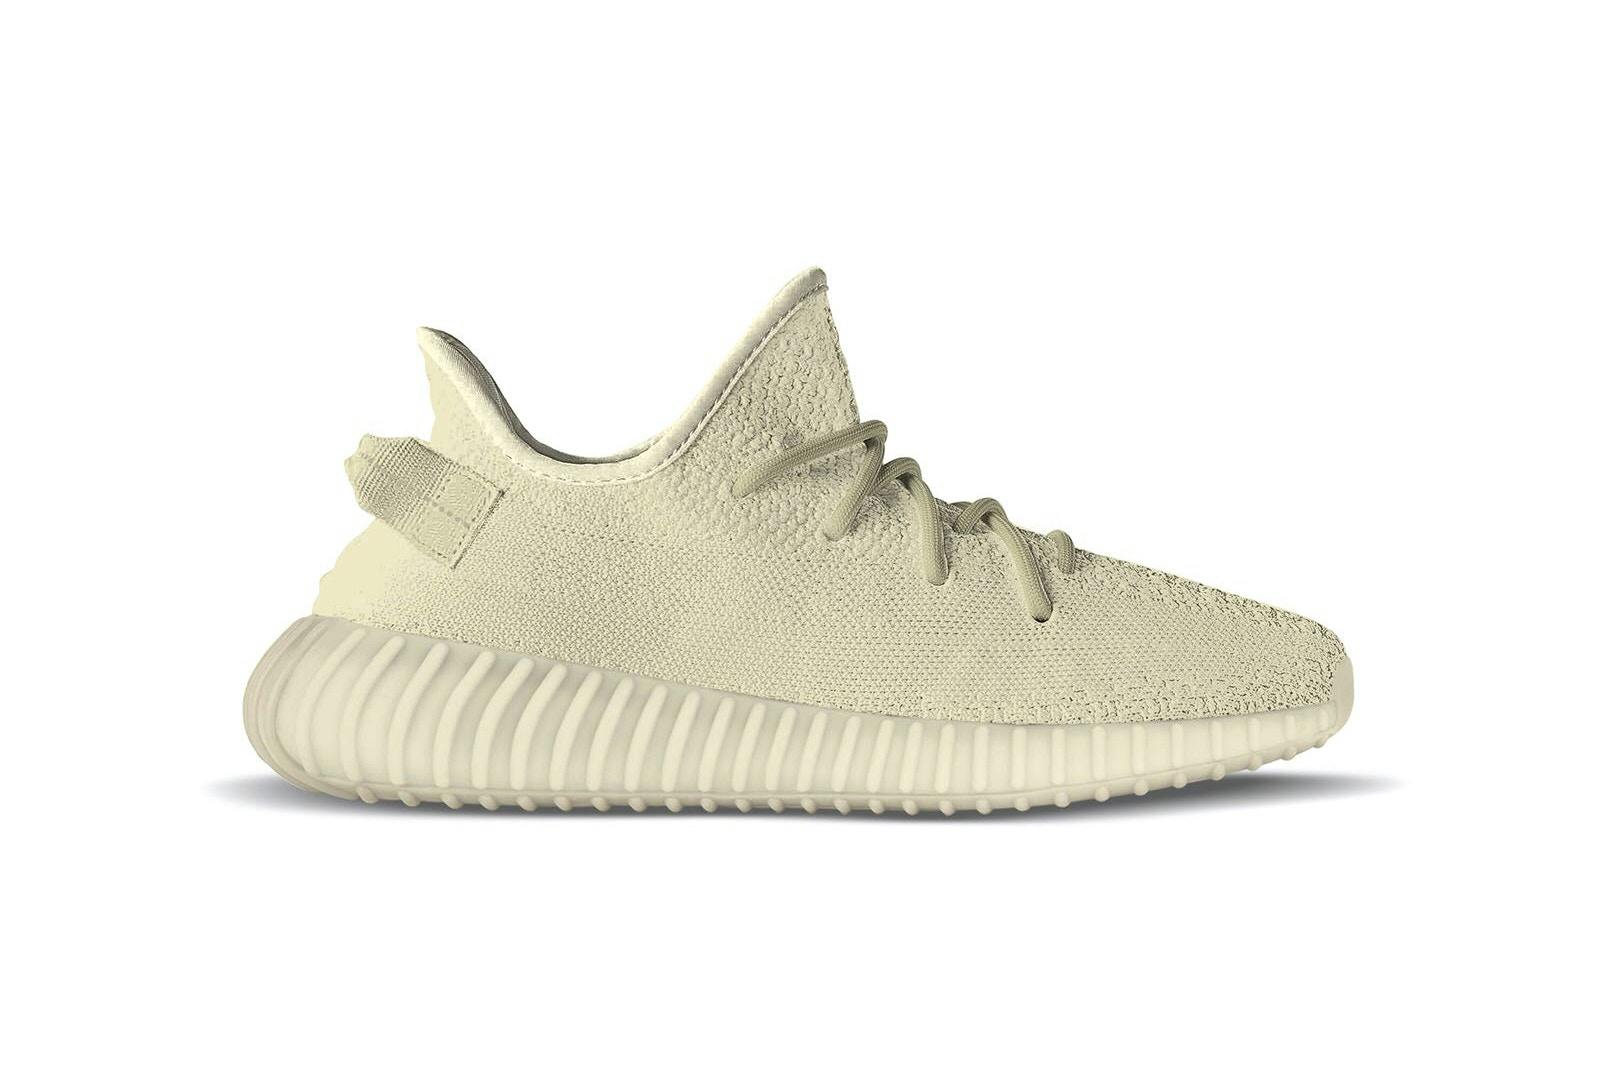 adidas Originals YEEZY BOOST 350 Butter 2018 new YEEZY SHOES Kanye West